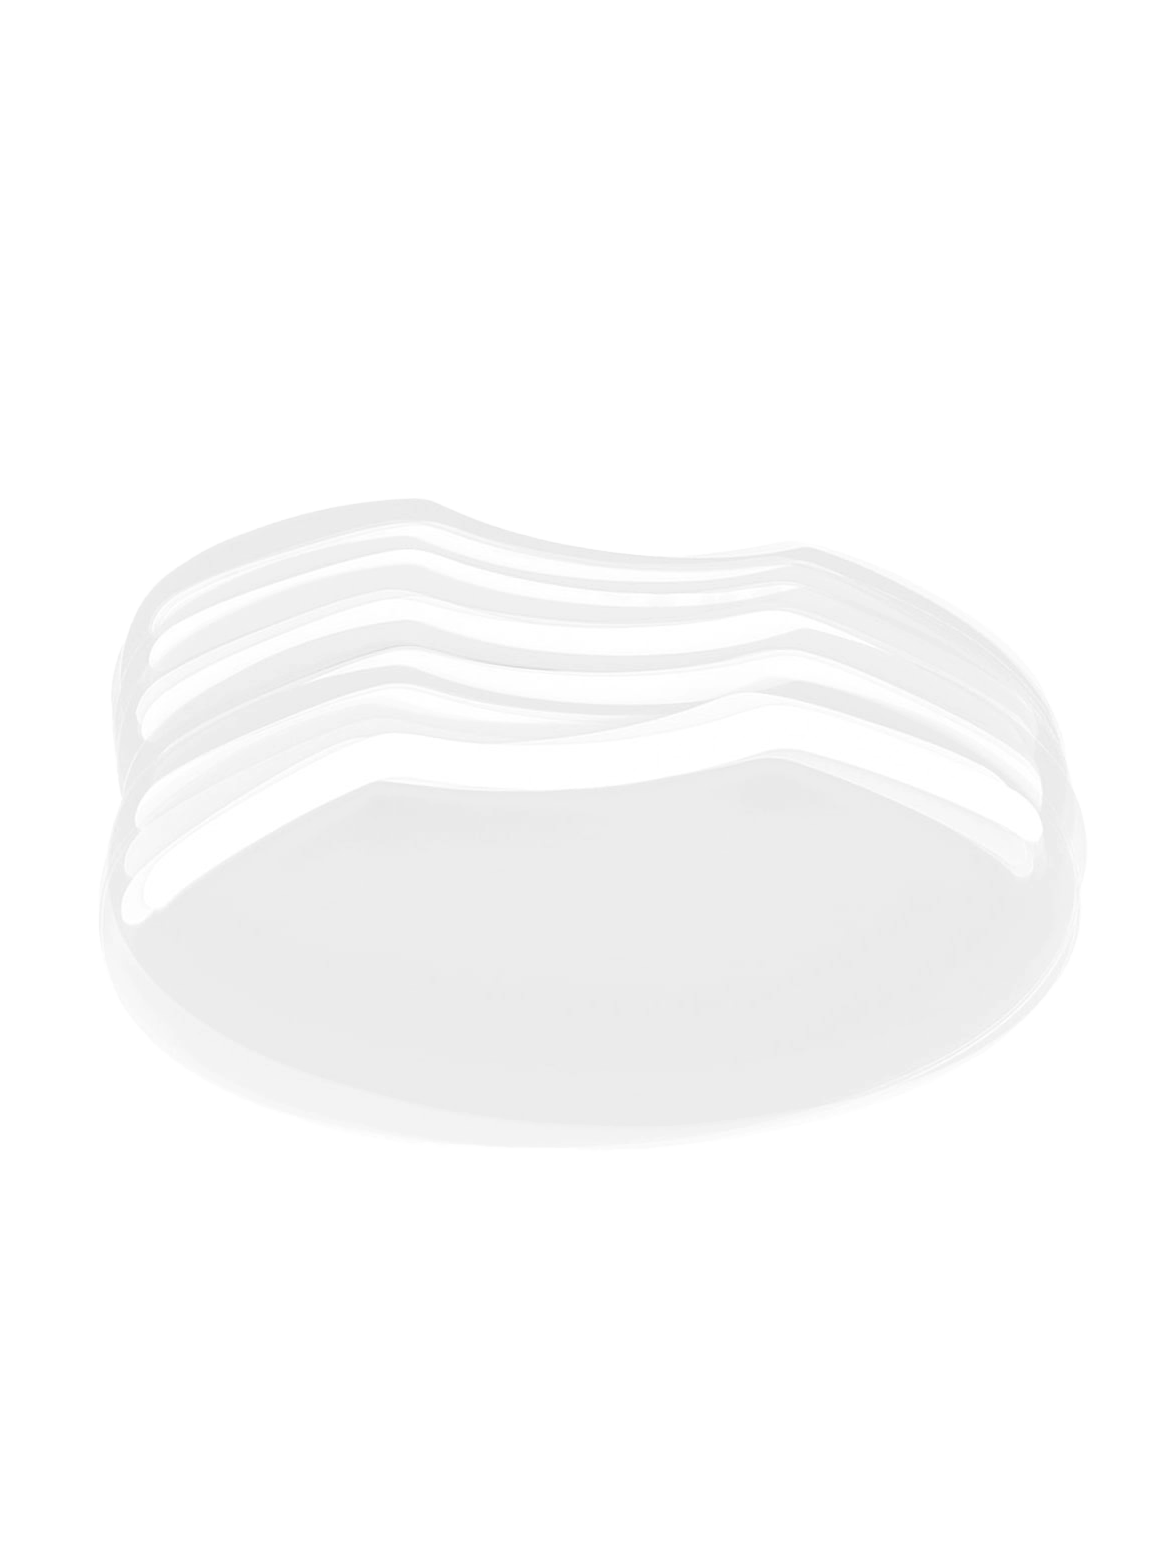 Contour Fit Clear Aftercare Shower Visor (Seconds) -  - HighbrowLab - HighbrowLab 